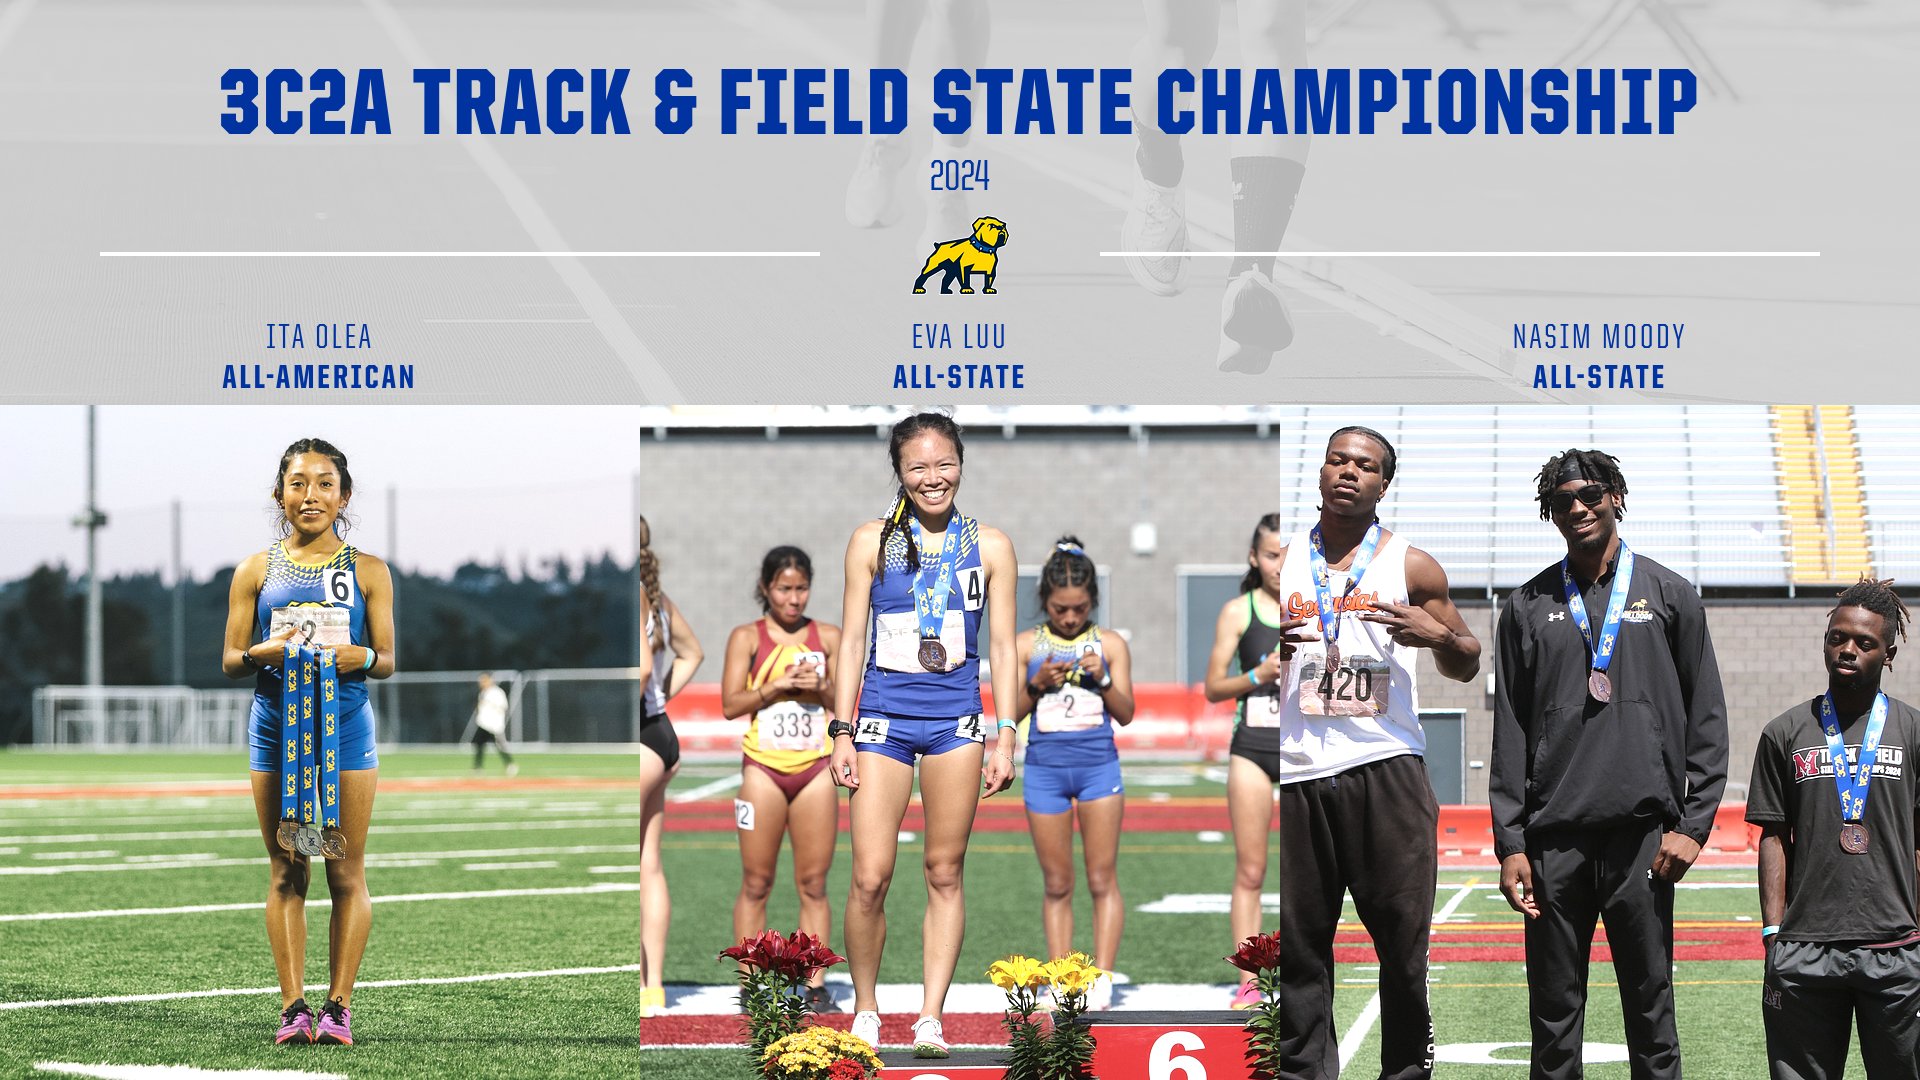 Track & Field Concludes Season at State Championship, Olea Takes Second in Women's 10k